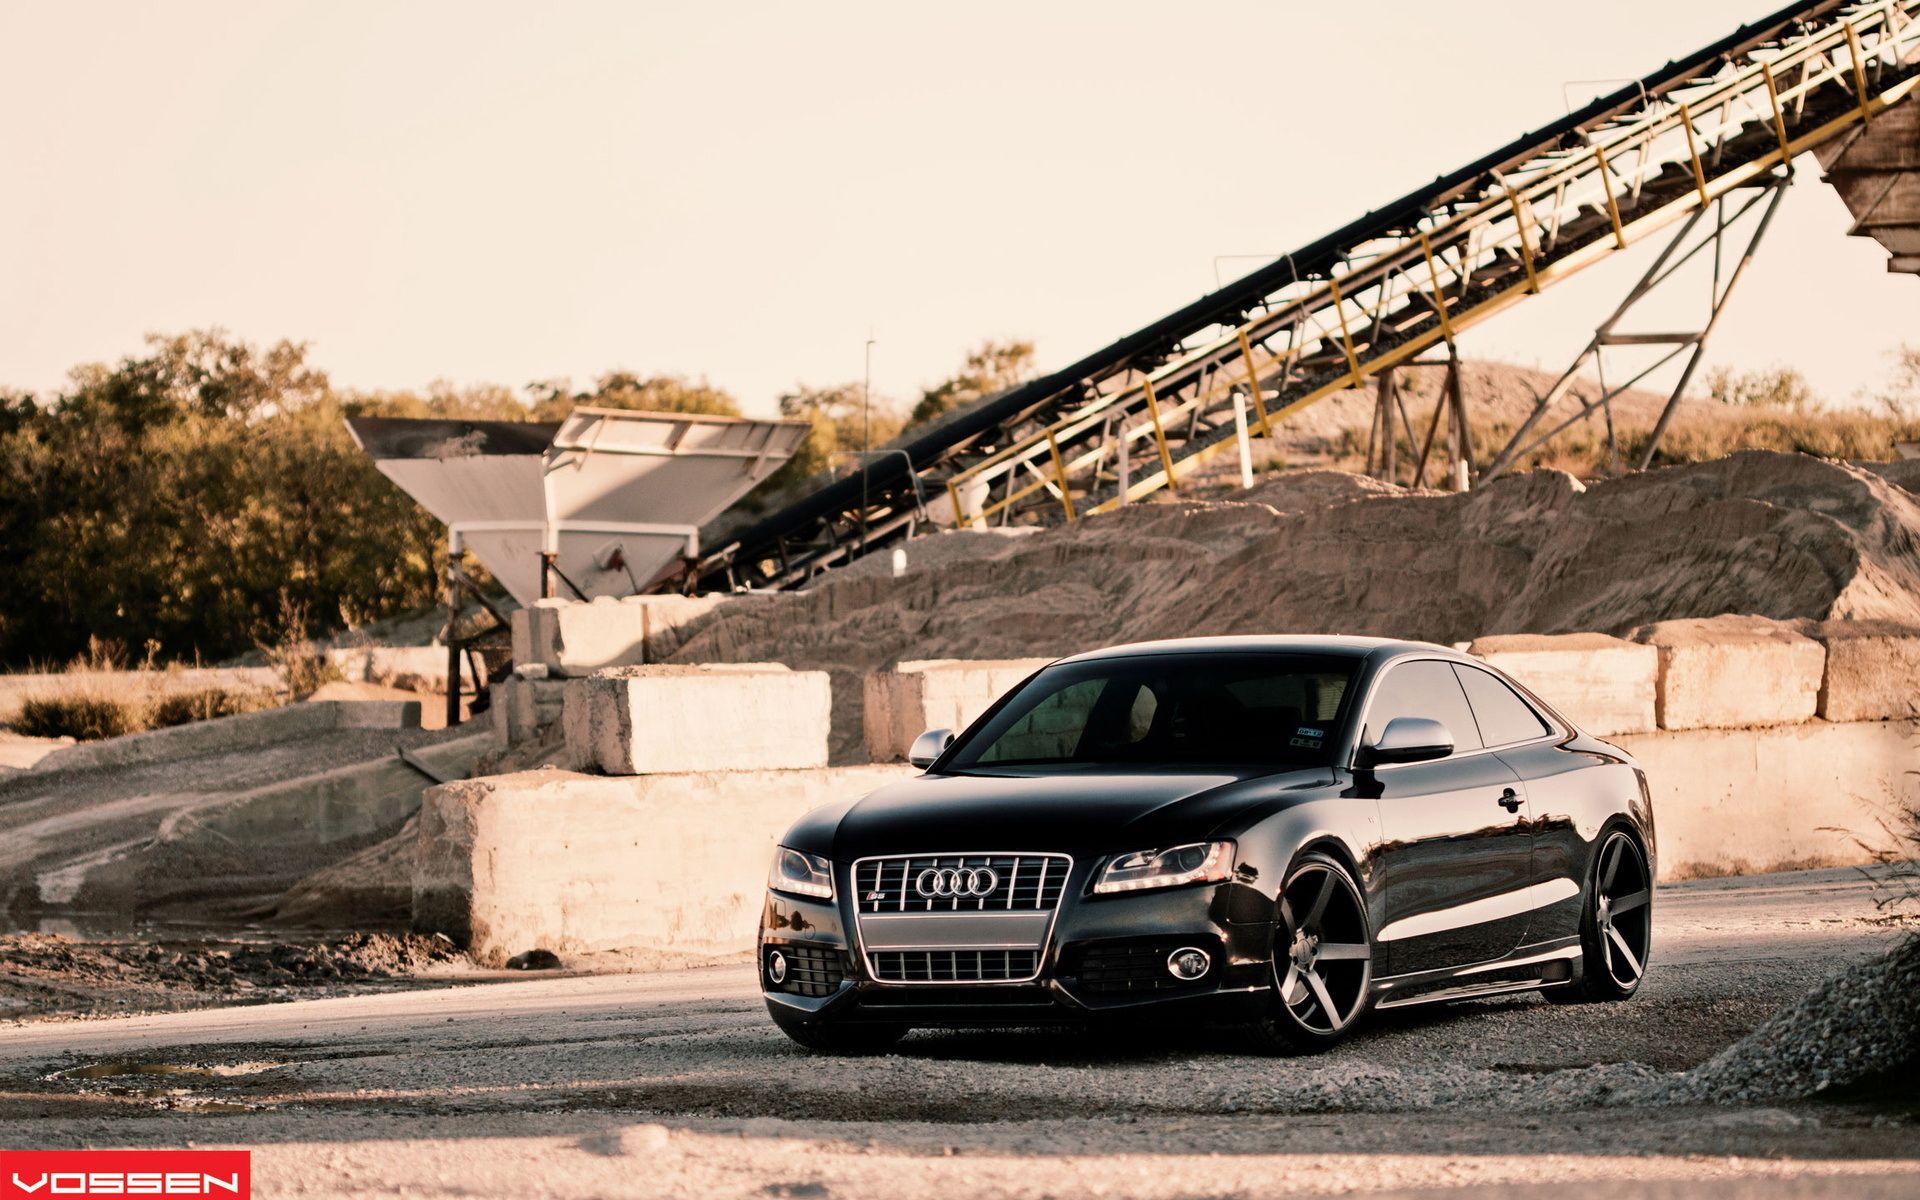 Audi S5 Wallpapers and Background Images   stmednet